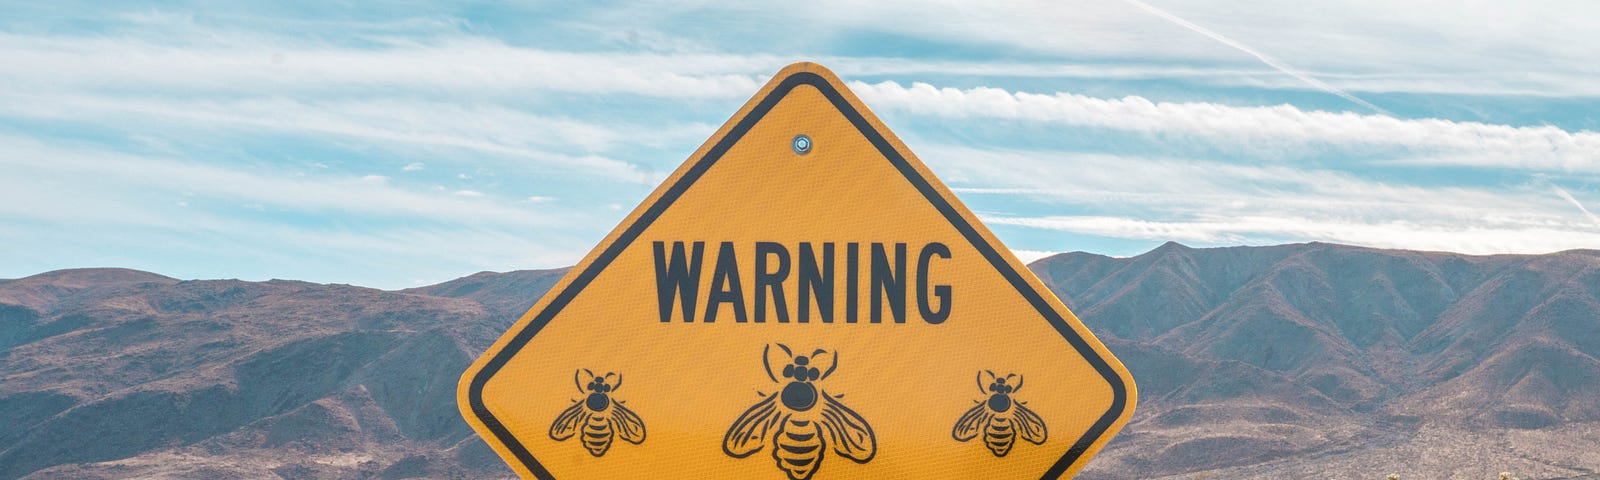 Yield sign with cartoons of bees reads “Warning Ahead”